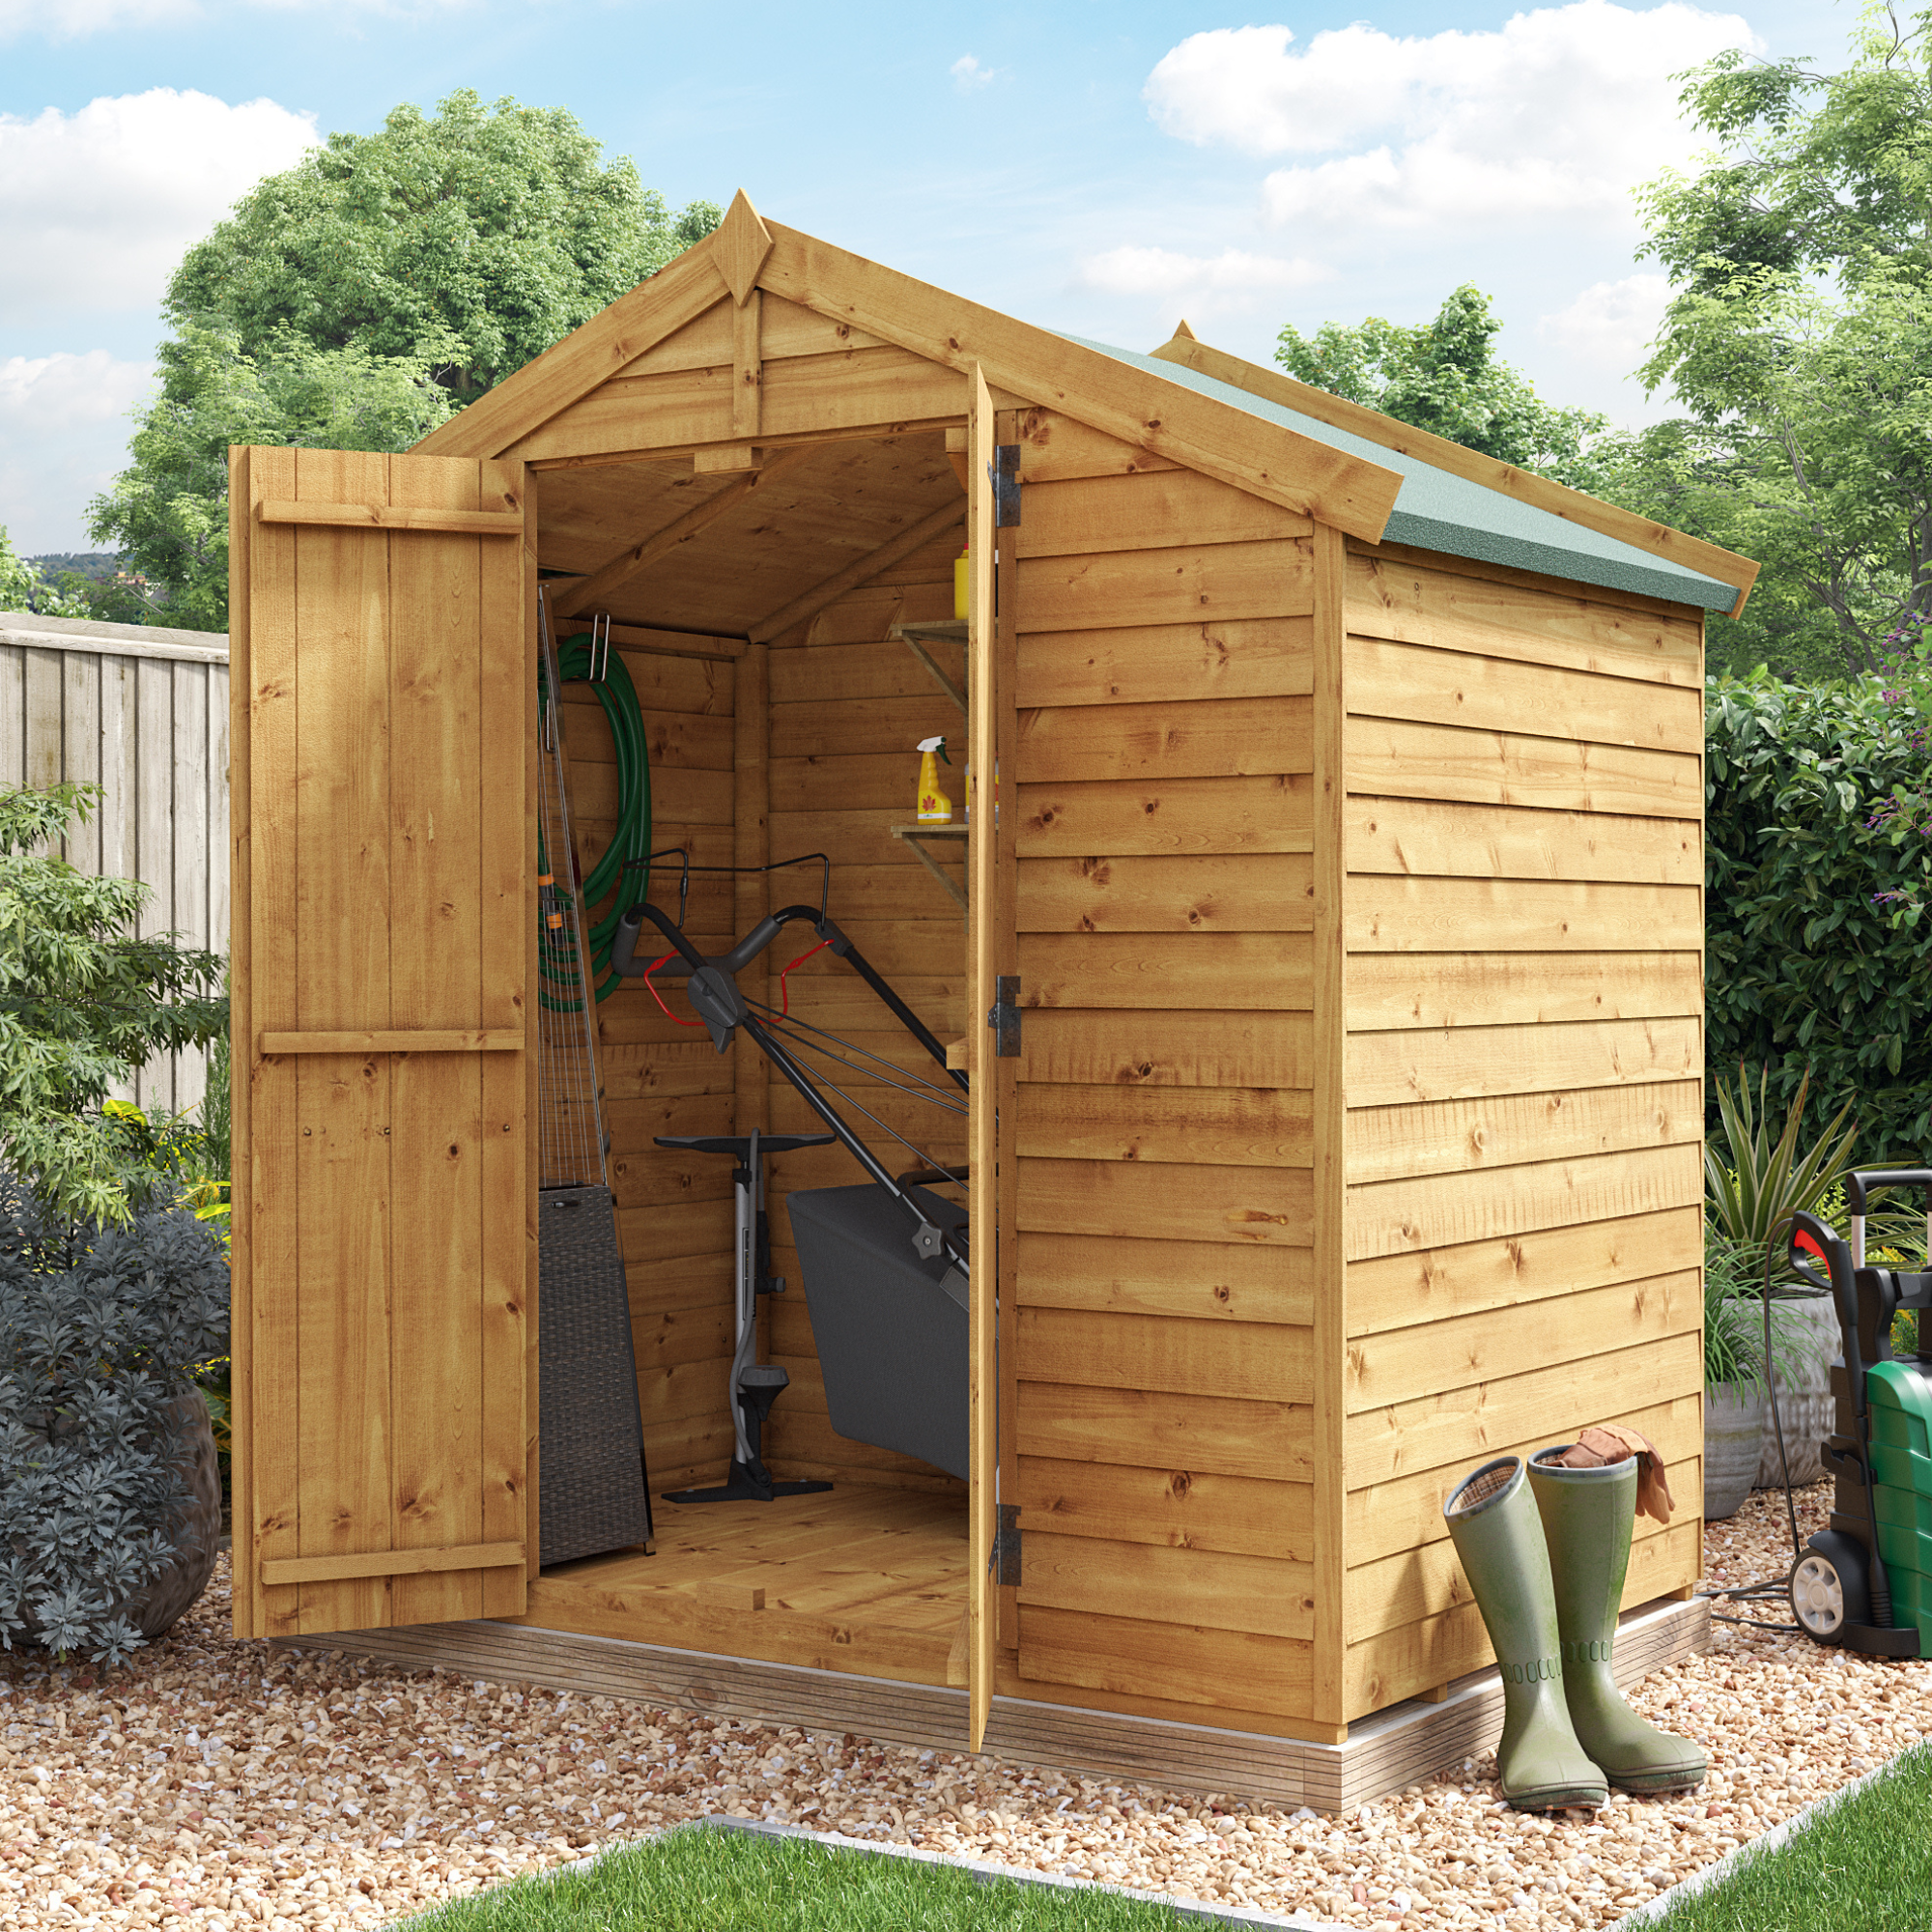 4 x 6 Shed - BillyOh Keeper Overlap Apex Wooden Shed - Windowless 4x6 Garden Shed